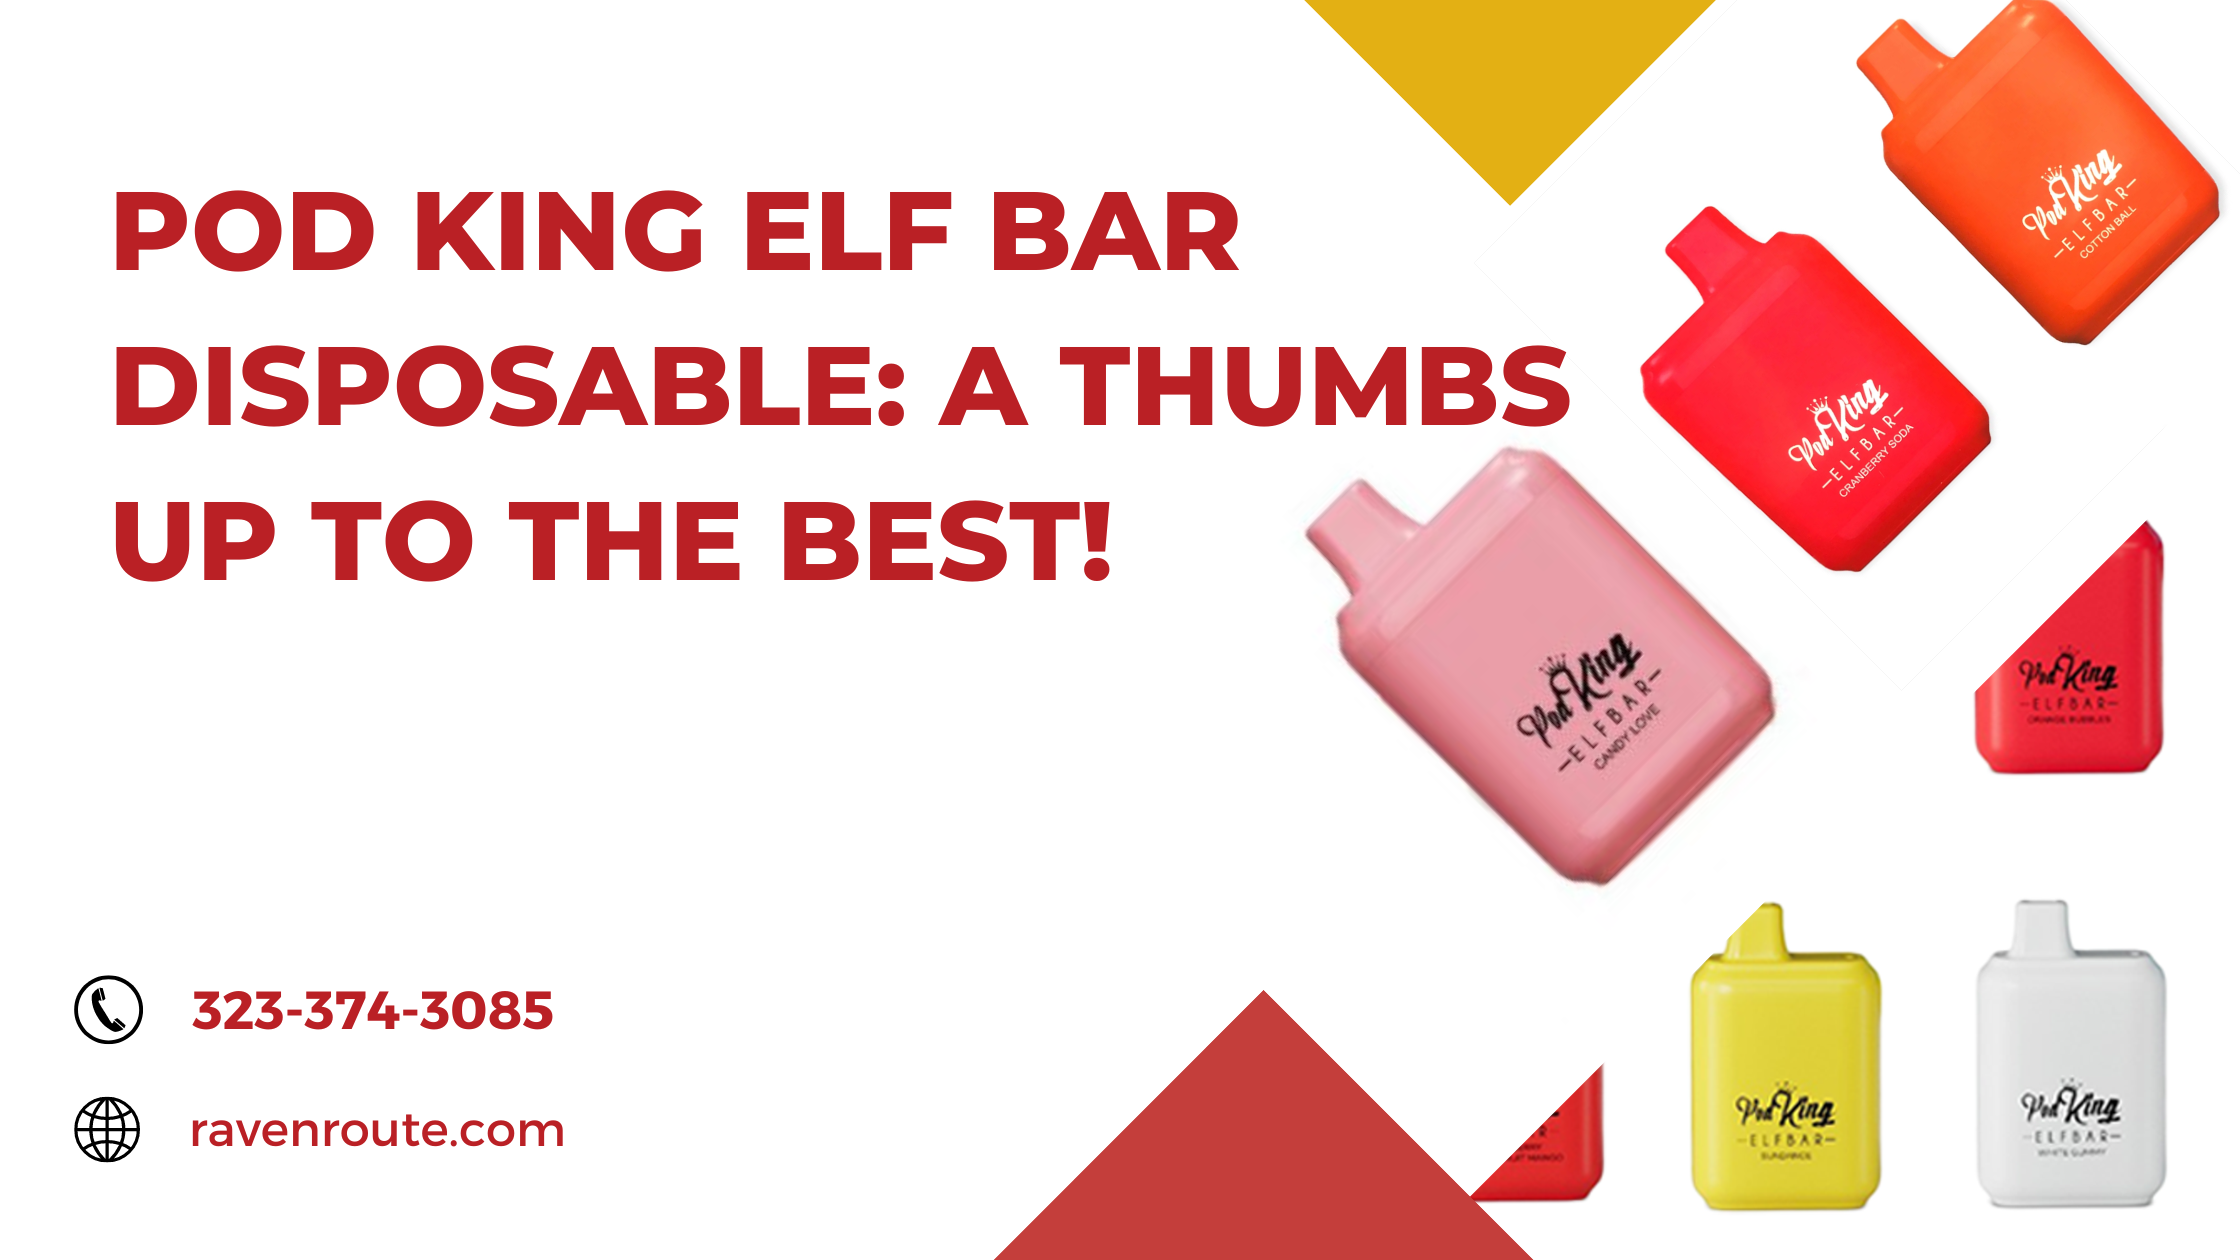 Pod King Elf Bar Disposable; A Thumbs Up To The Best!